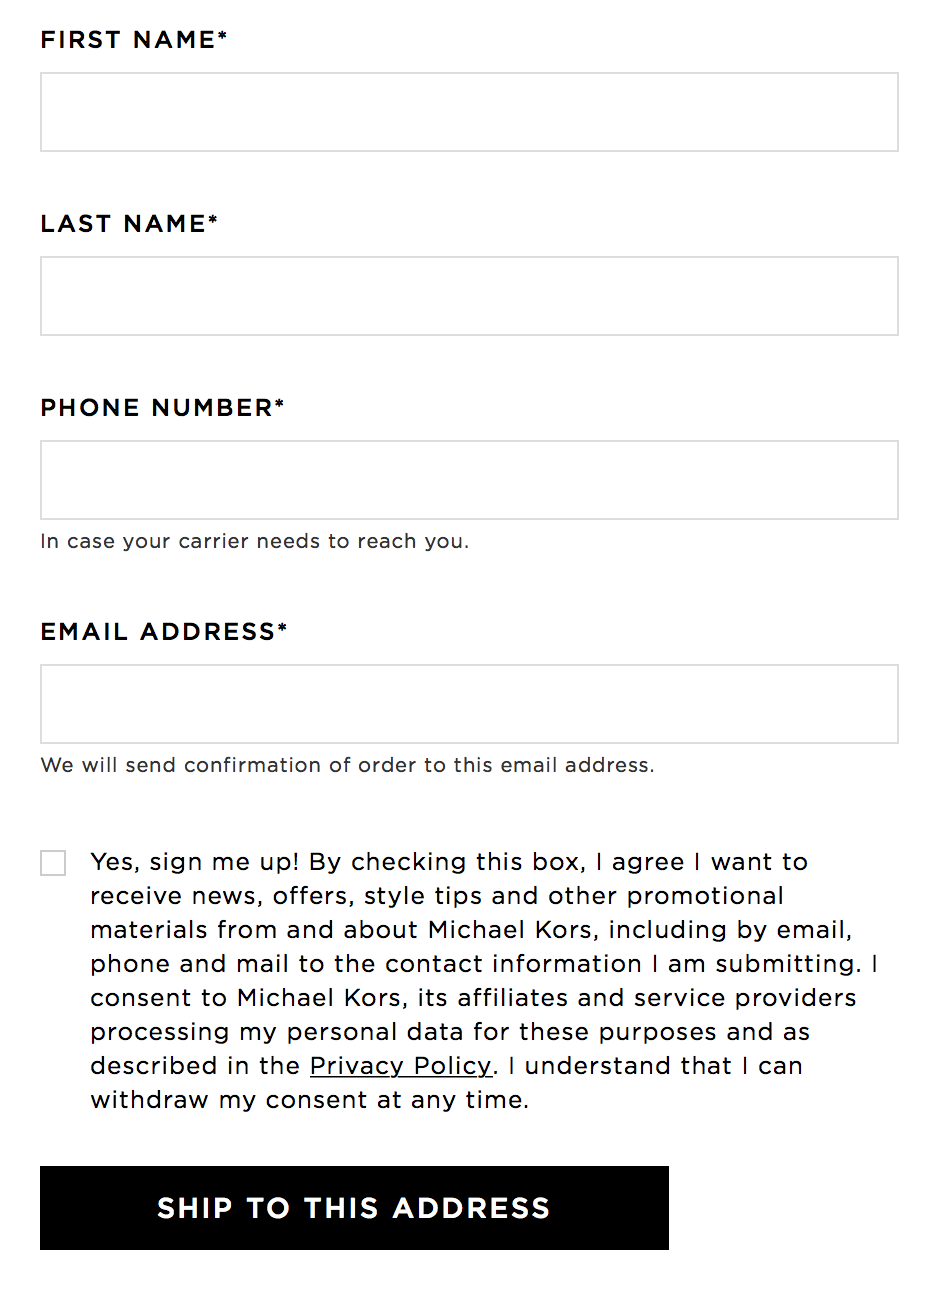 Unnecessary checkboxes for opt-in forms under GDPR example from Michael Kors